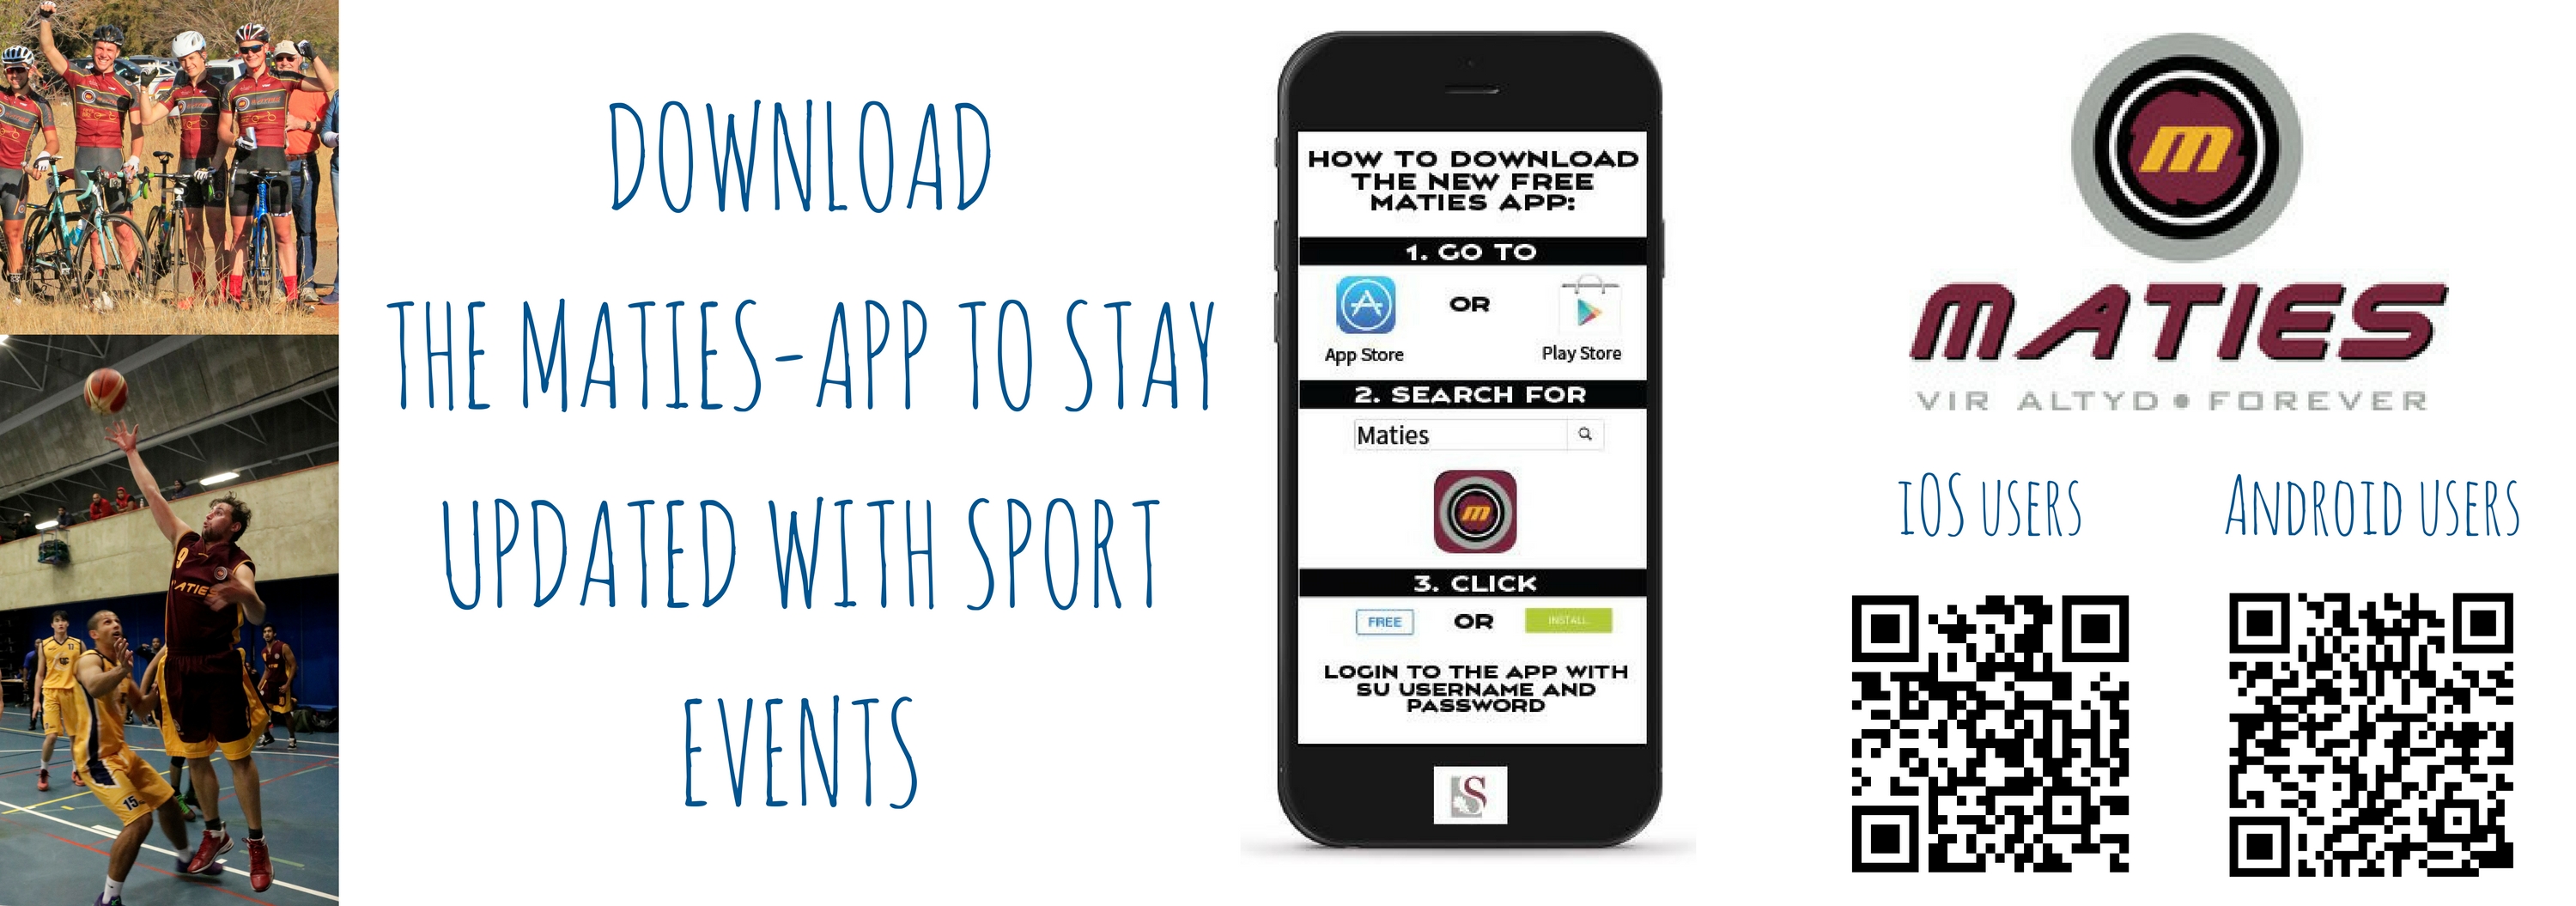 DOWNLOADTHE MATIES APP TO STAY UPDATED WITH SPORT EVENTS.jpg